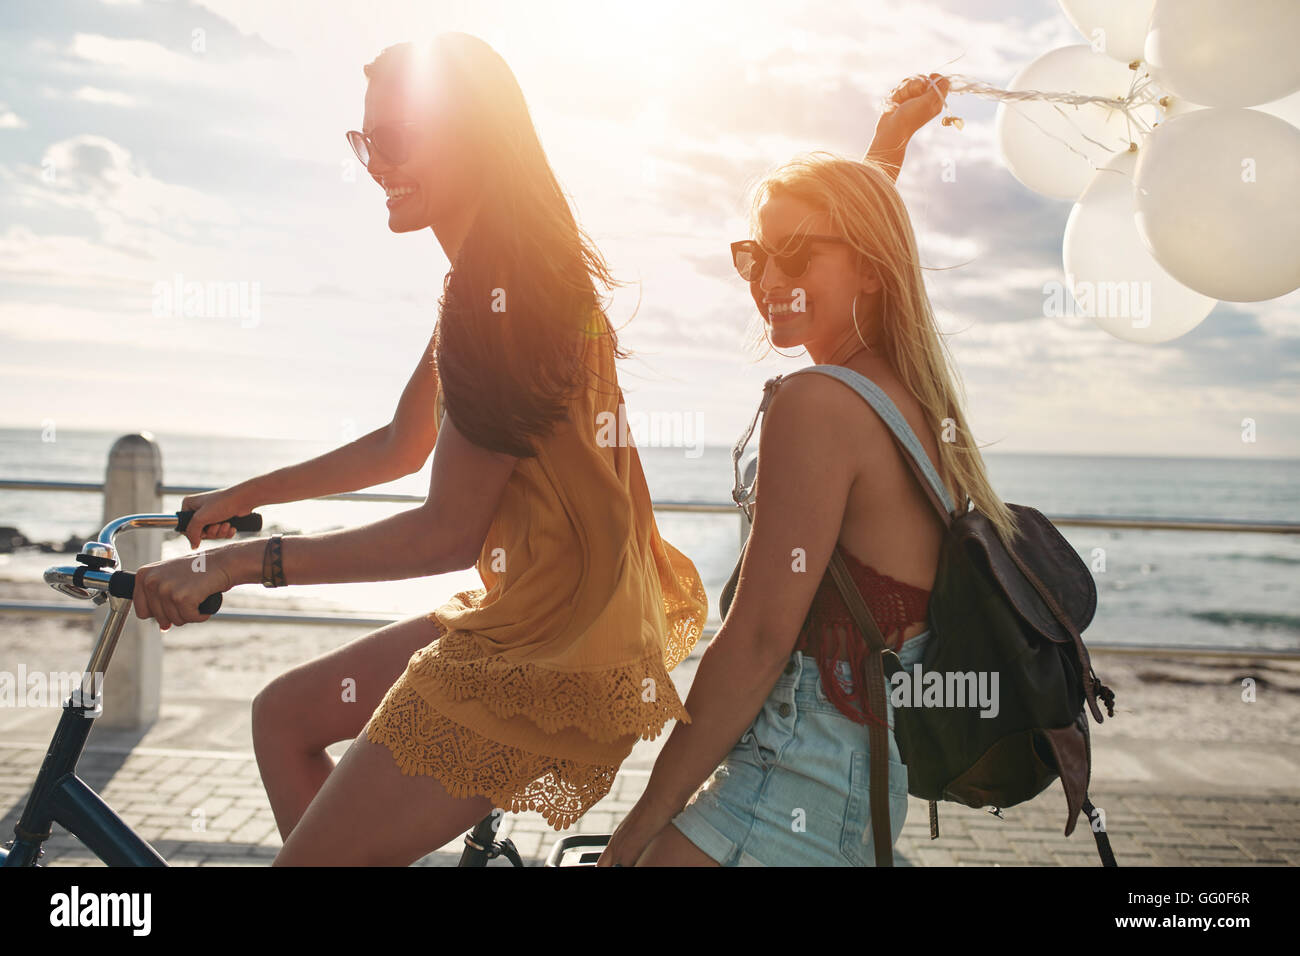 Happy young women riding a bicycle together with balloons. Best friends having fun on a cycle by the sea. Stock Photo